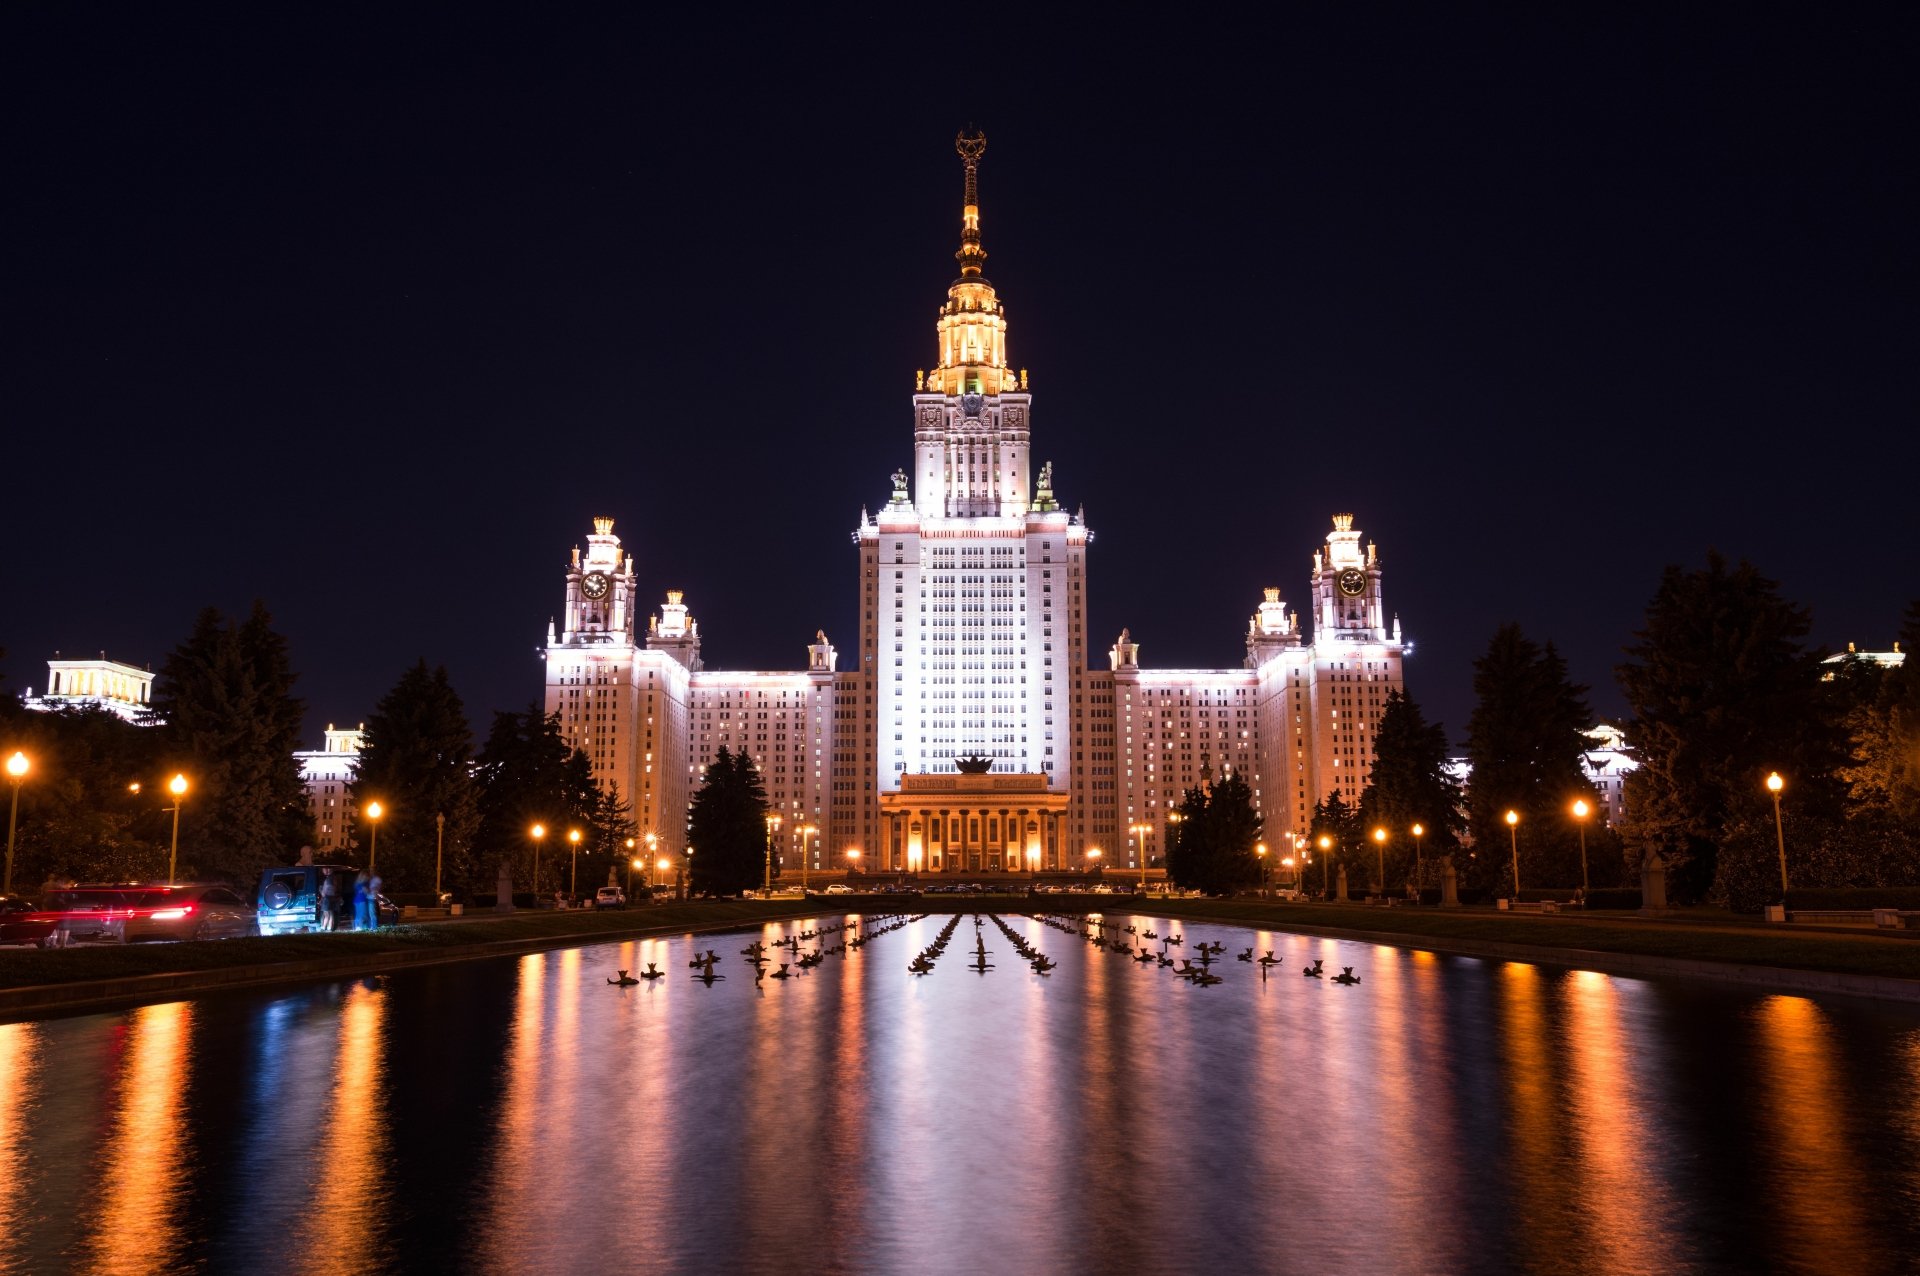 7512x4992 Moscow State University Wallpaper Background Image. 